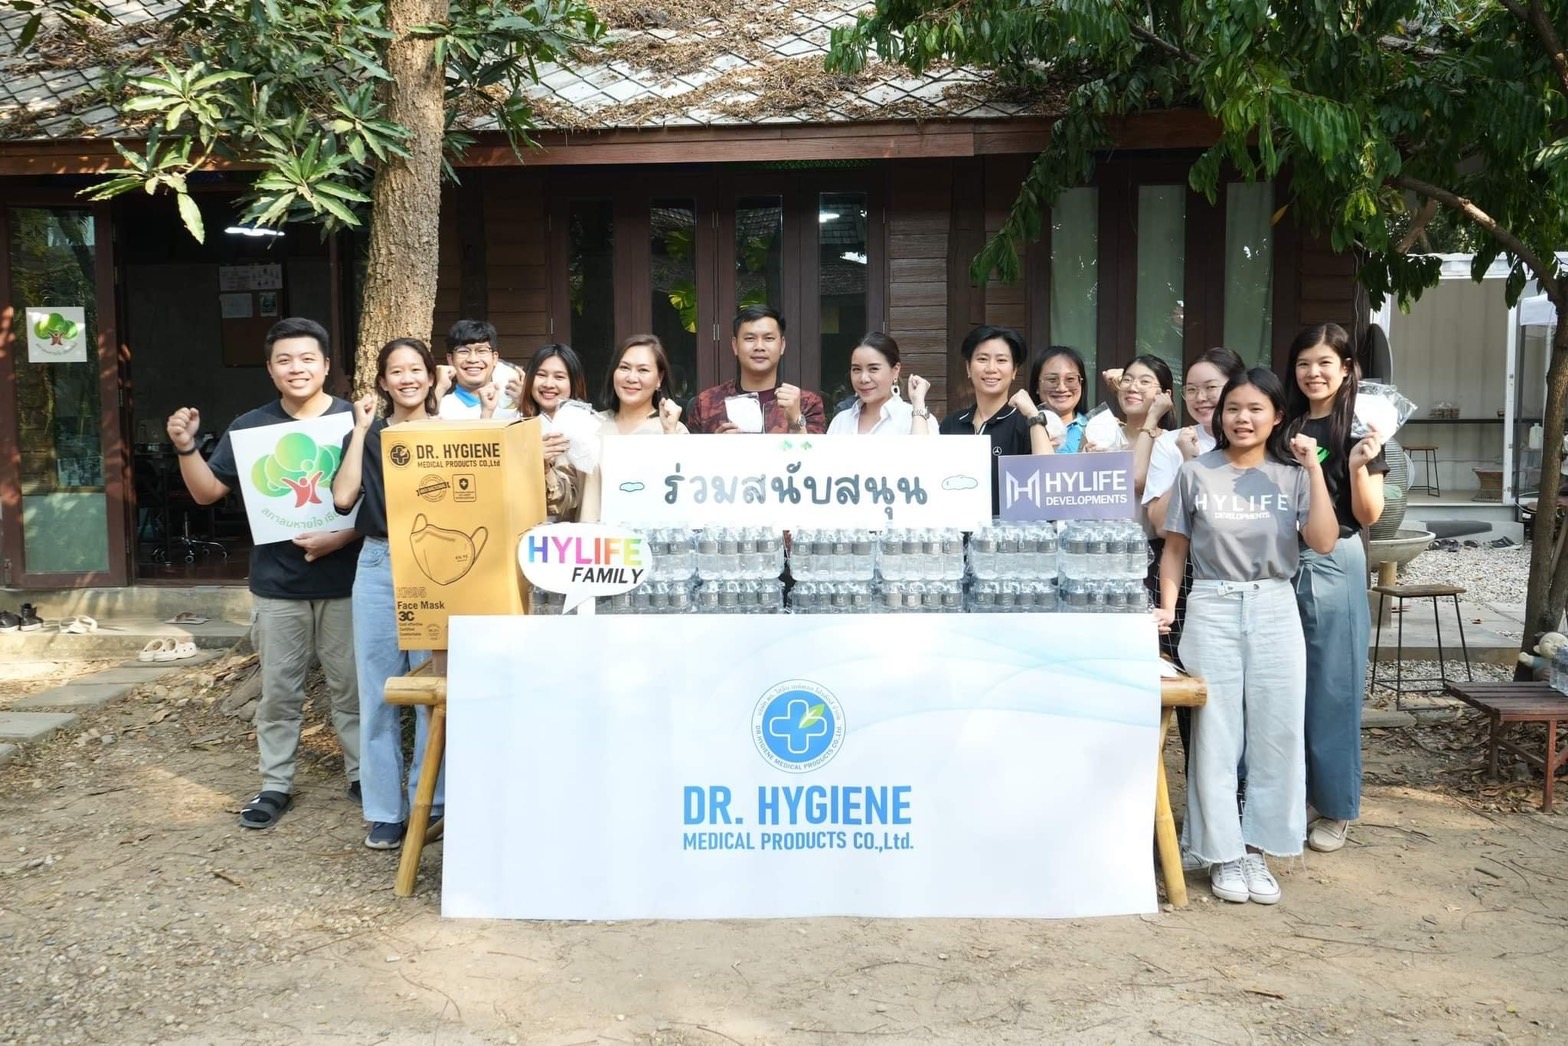 DR Hygiene Medical Products Seeks to Prevent Wildfires and Smog Near Chiang Mai